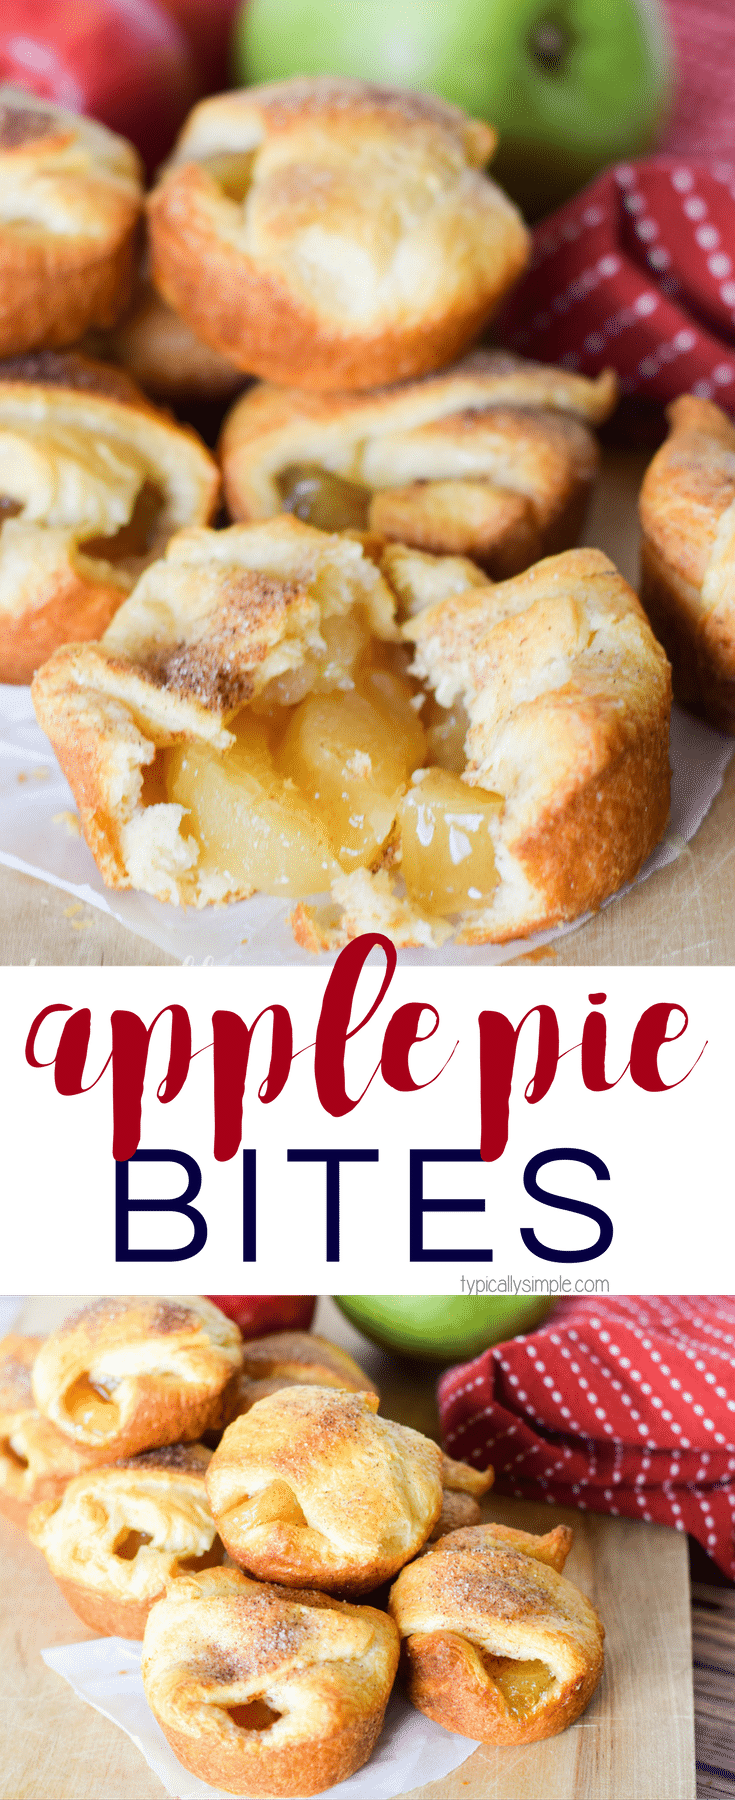 Packed full of baked apples and cinnamon flavor, these apple pie bites are a yummy fall treat! A simple recipe that the kids can help make!